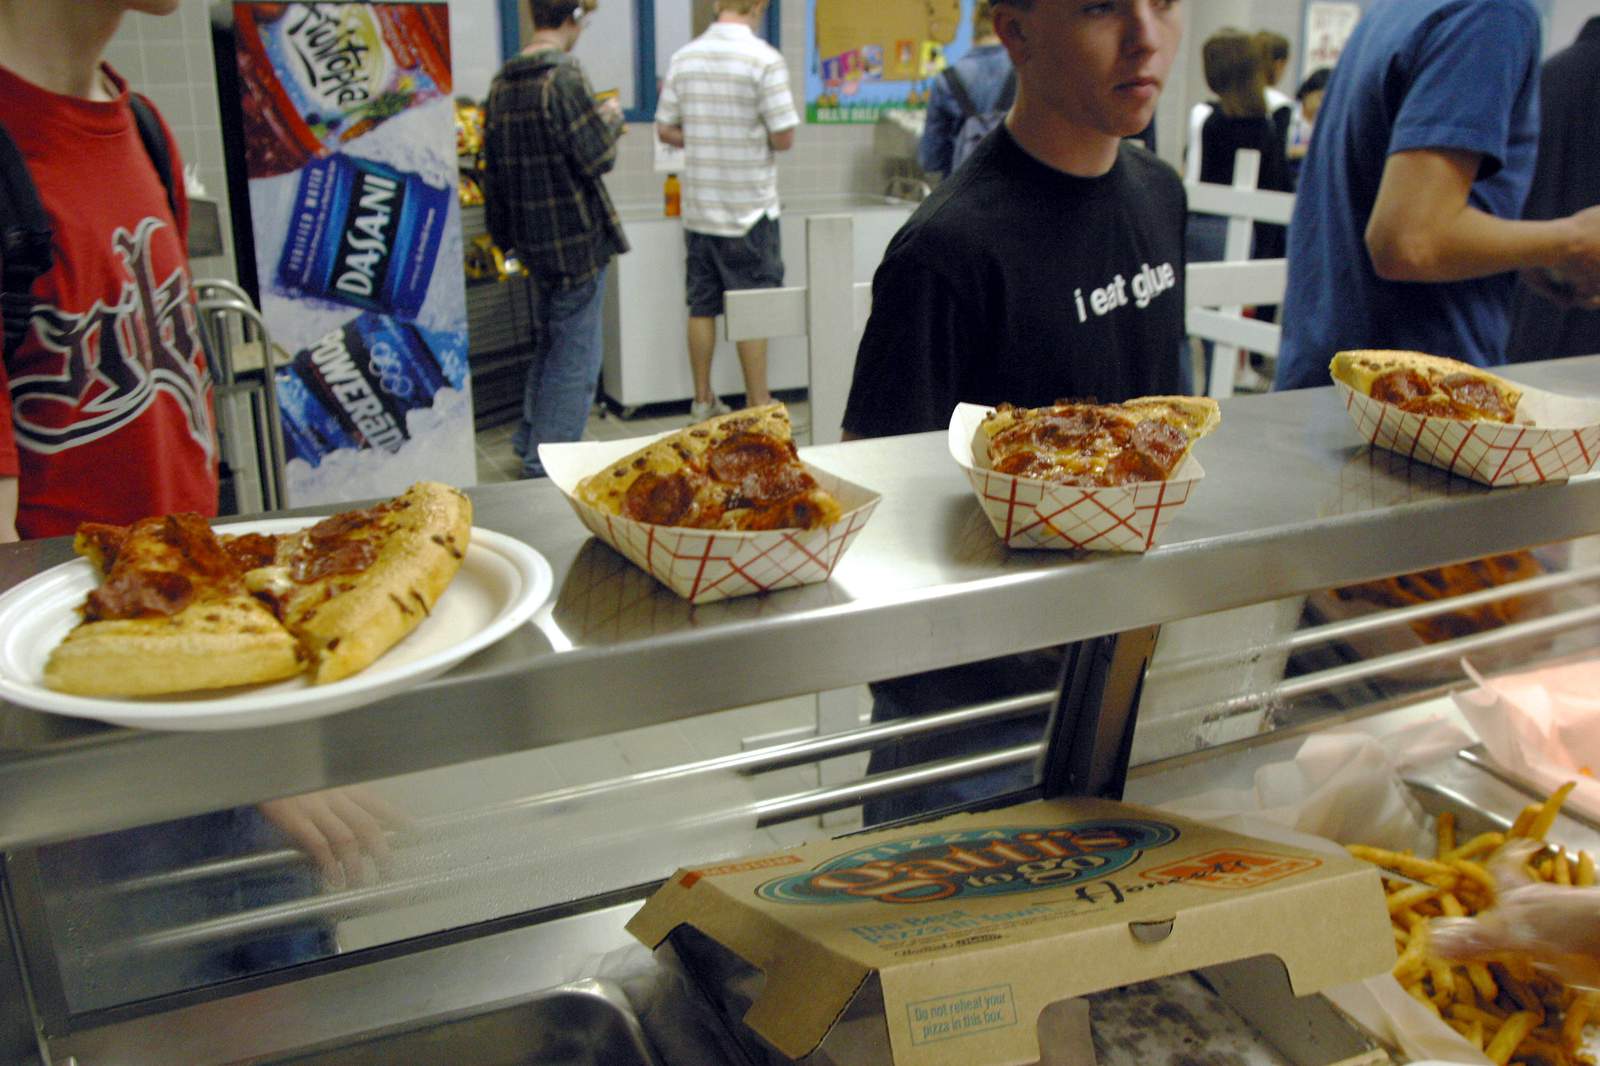 Vermont looks to become first state to provide universal meals to public school students